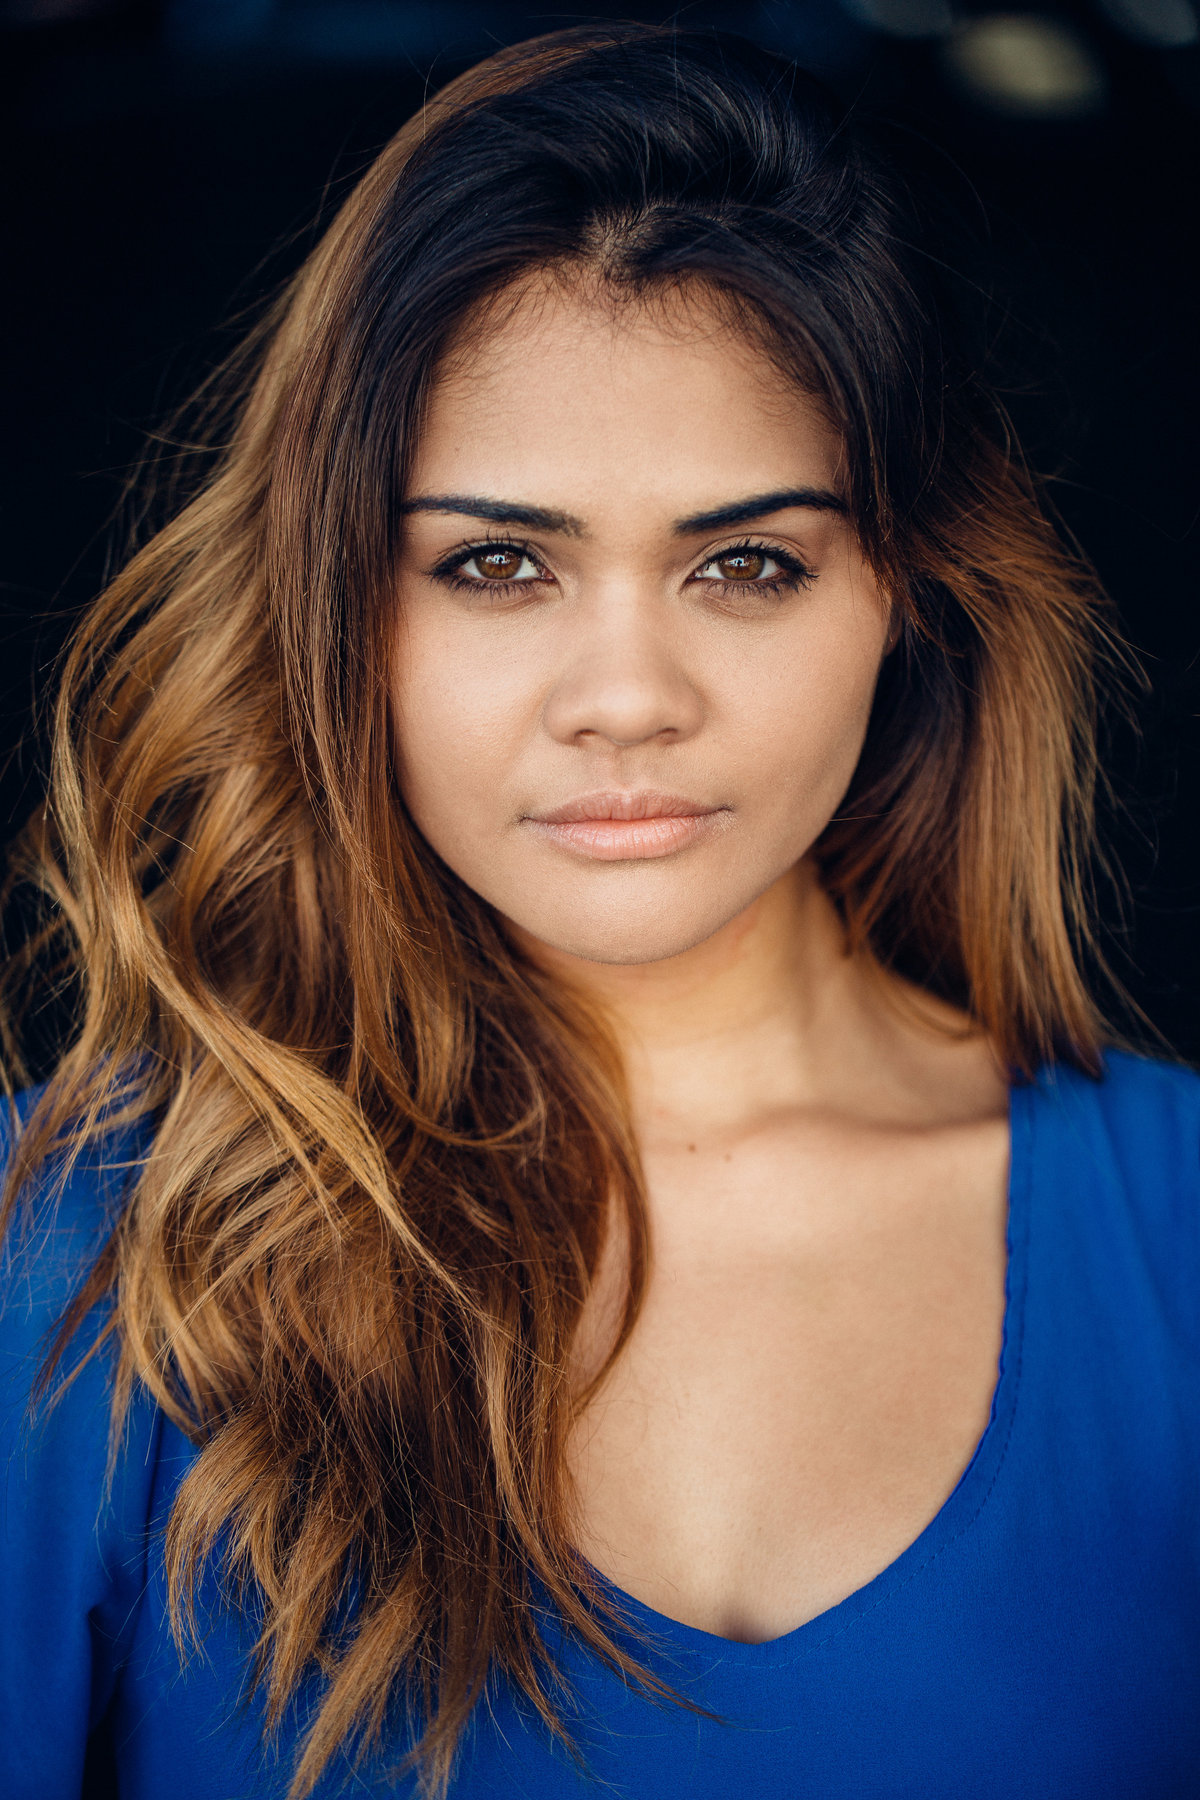 Headshot Photograph Of Young Woman In Blue V-Neck Shirt Los Angeles